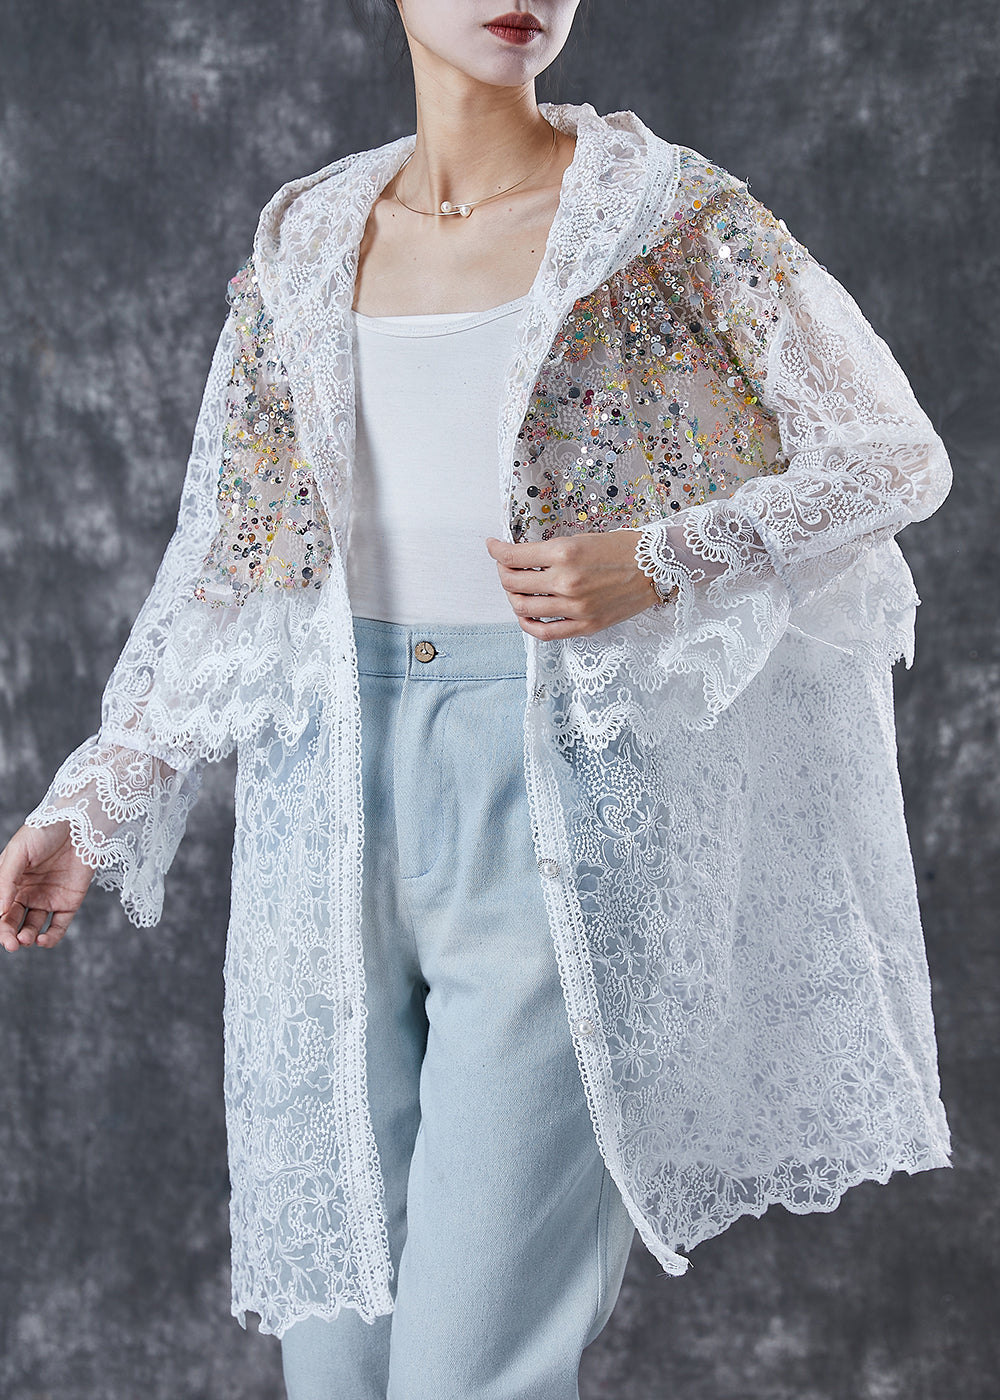 French White Sequins Hollow Out Lace Jackets Spring